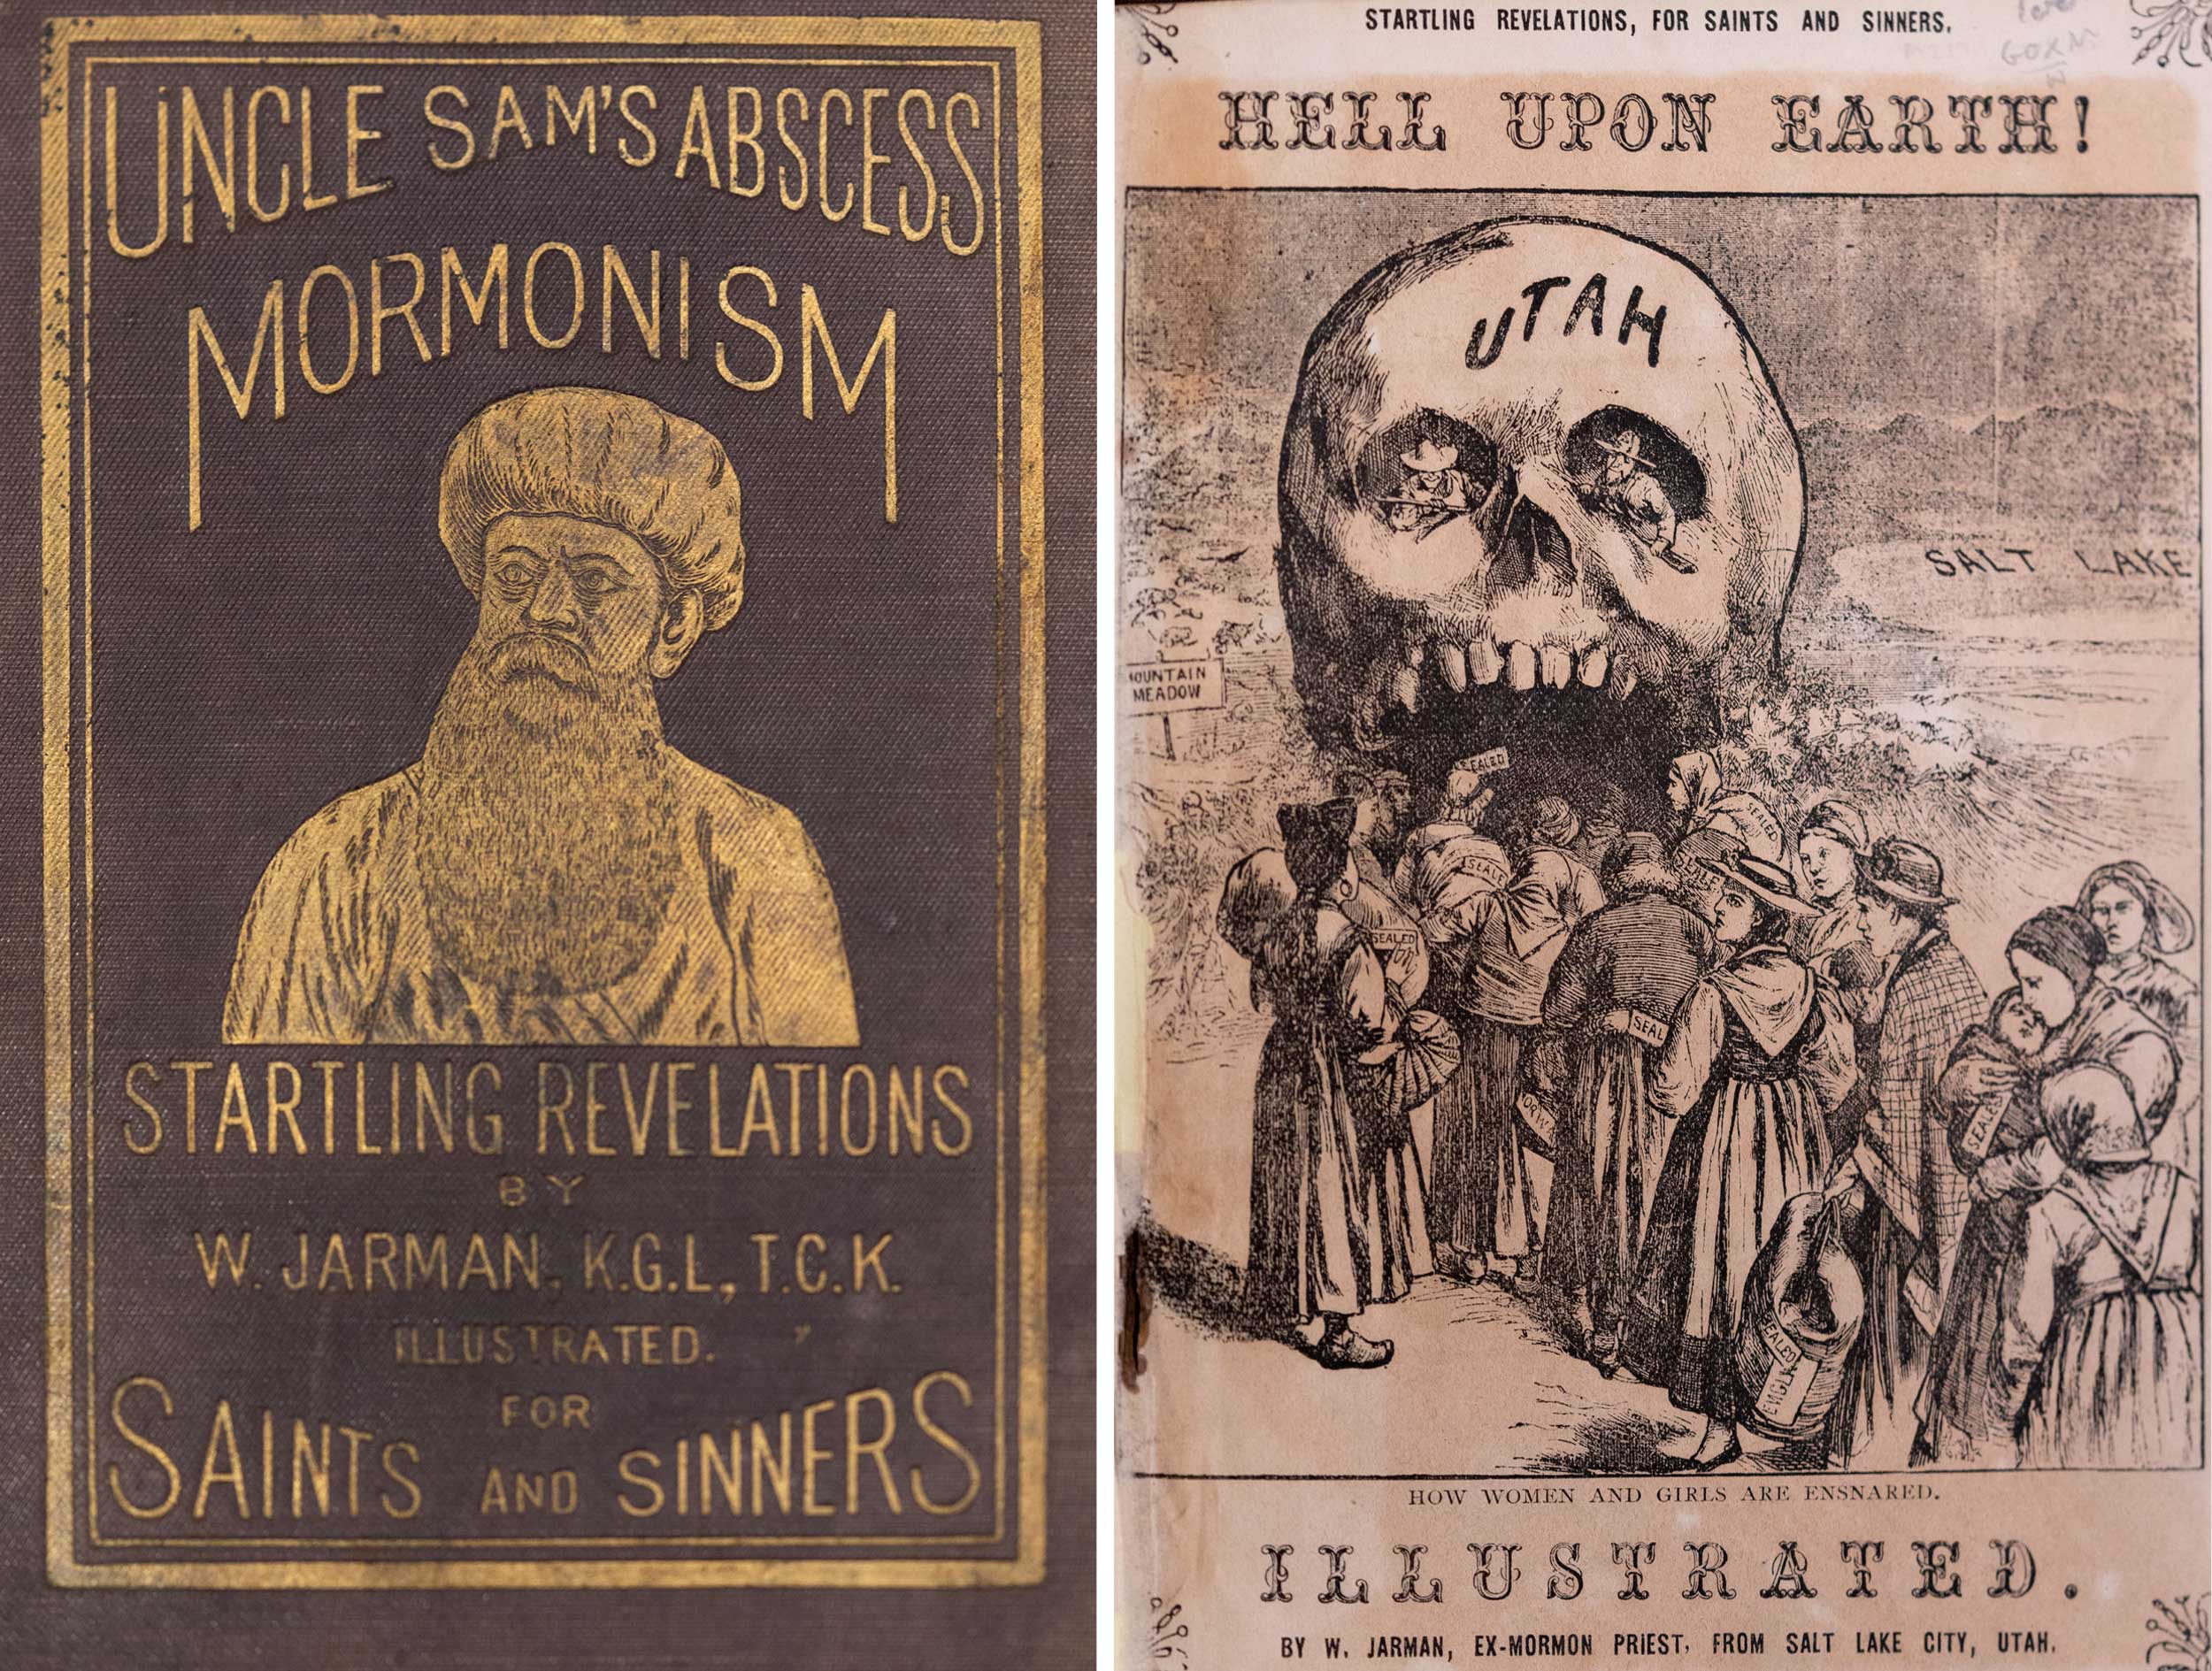 Left: Book covers, Uncle sam's abscess mormonism startling revelations Right:  Book cover Hell upon earth!